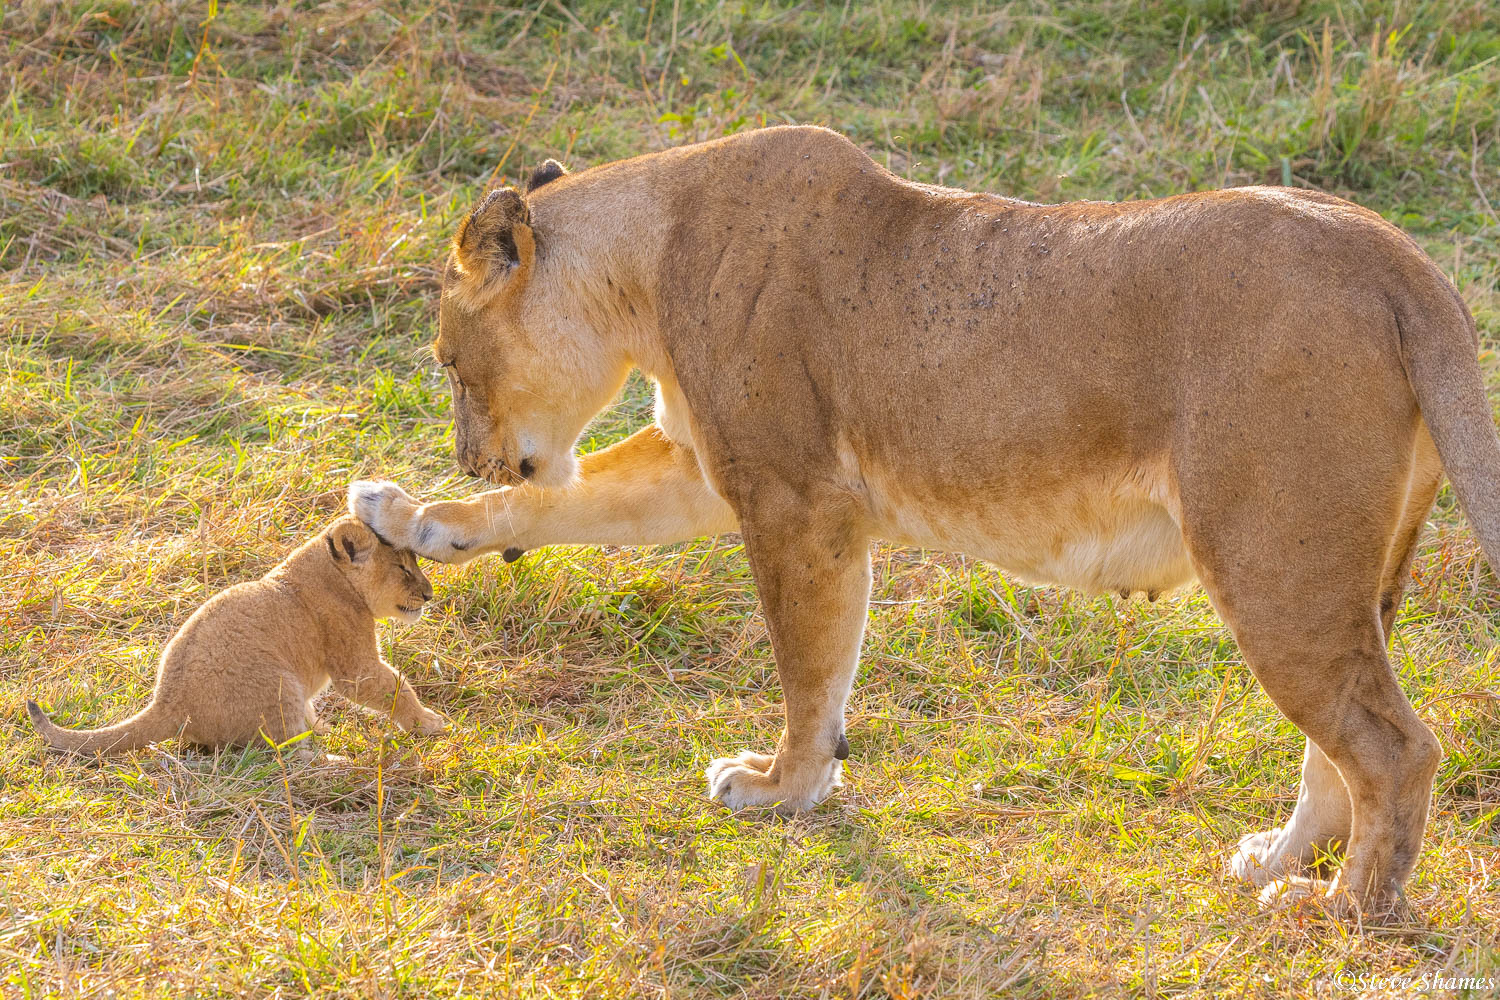 This lioness mother seems to be scolding her little cub.